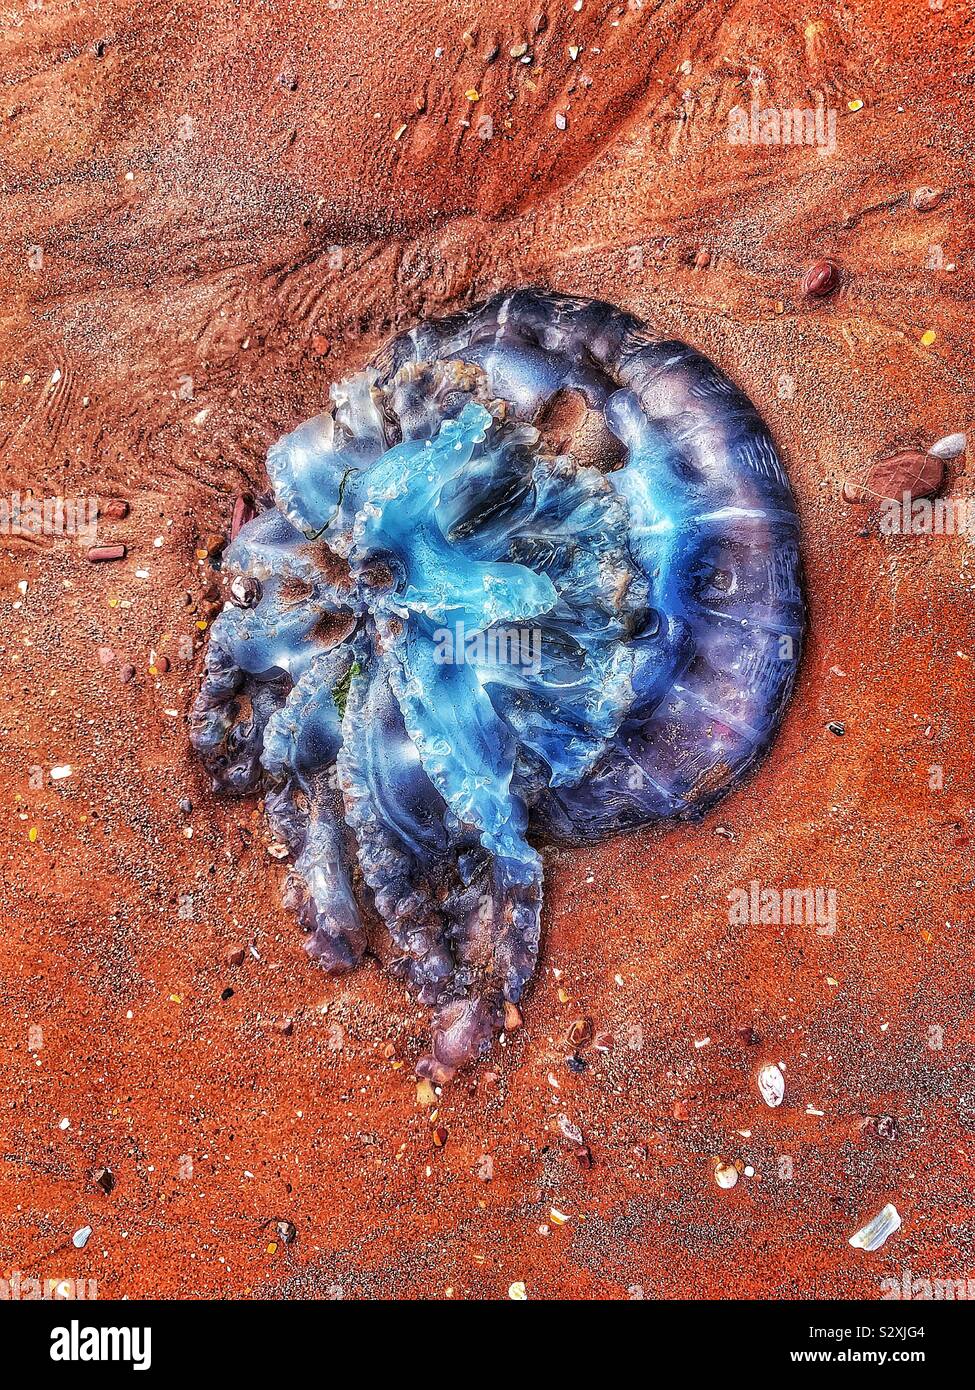 Washed up jellyfish on a red sand beach Stock Photo